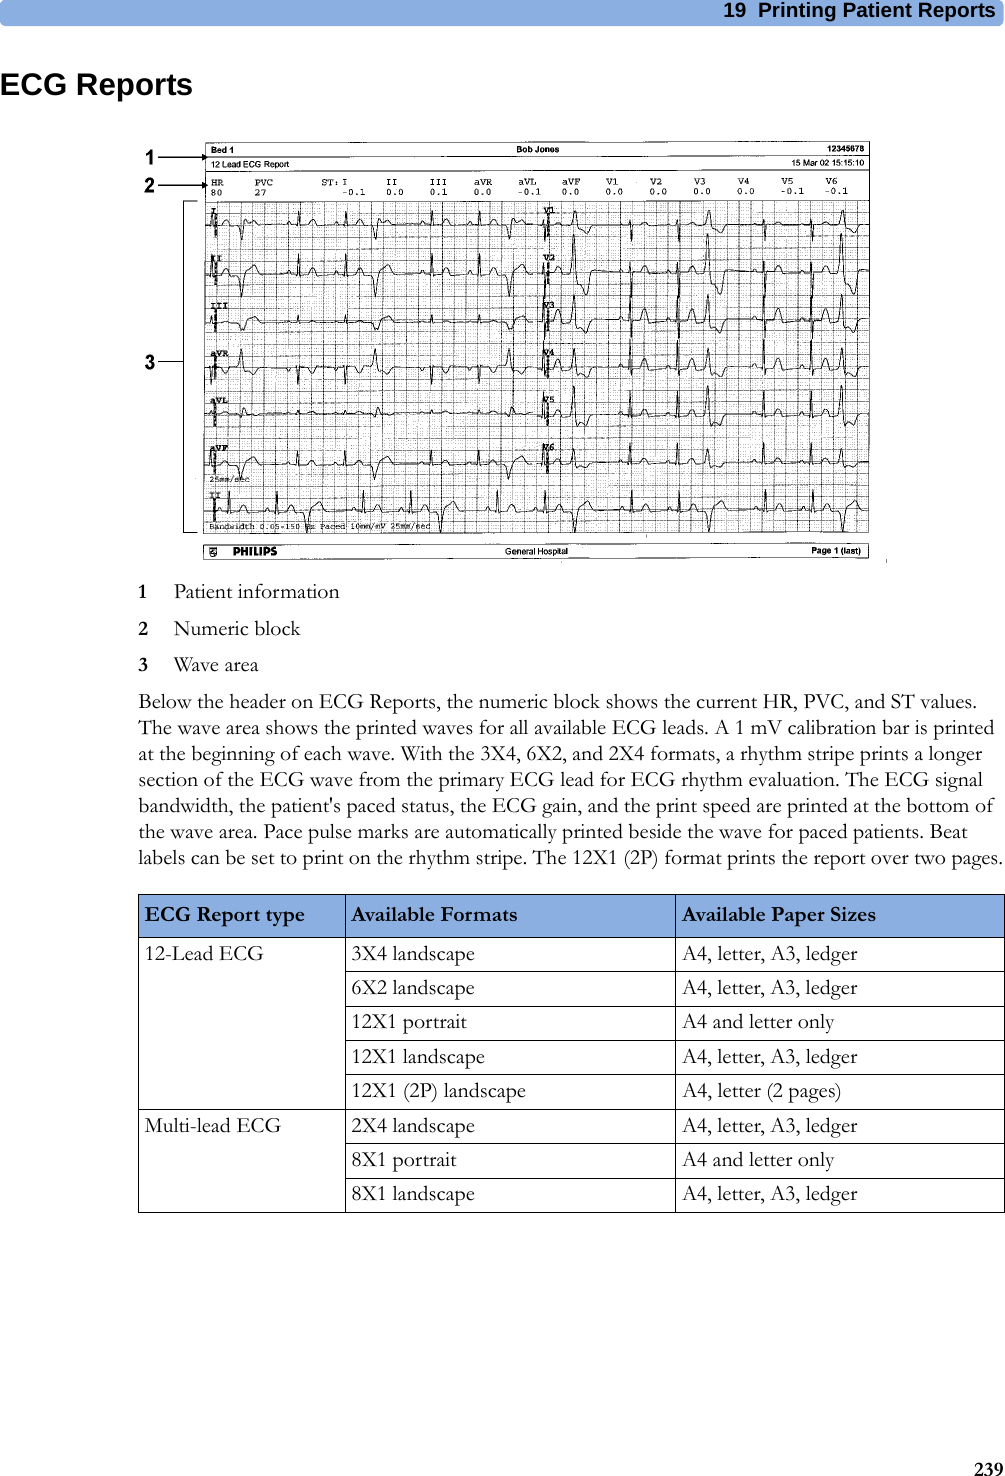 19 Printing Patient Reports239ECG Reports1Patient information2Numeric block3Wave areaBelow the header on ECG Reports, the numeric block shows the current HR, PVC, and ST values. The wave area shows the printed waves for all available ECG leads. A 1 mV calibration bar is printed at the beginning of each wave. With the 3X4, 6X2, and 2X4 formats, a rhythm stripe prints a longer section of the ECG wave from the primary ECG lead for ECG rhythm evaluation. The ECG signal bandwidth, the patient&apos;s paced status, the ECG gain, and the print speed are printed at the bottom of the wave area. Pace pulse marks are automatically printed beside the wave for paced patients. Beat labels can be set to print on the rhythm stripe. The 12X1 (2P) format prints the report over two pages.ECG Report type Available Formats Available Paper Sizes12-Lead ECG 3X4 landscape A4, letter, A3, ledger6X2 landscape A4, letter, A3, ledger12X1 portrait A4 and letter only12X1 landscape A4, letter, A3, ledger12X1 (2P) landscape A4, letter (2 pages)Multi-lead ECG 2X4 landscape A4, letter, A3, ledger8X1 portrait A4 and letter only8X1 landscape A4, letter, A3, ledger